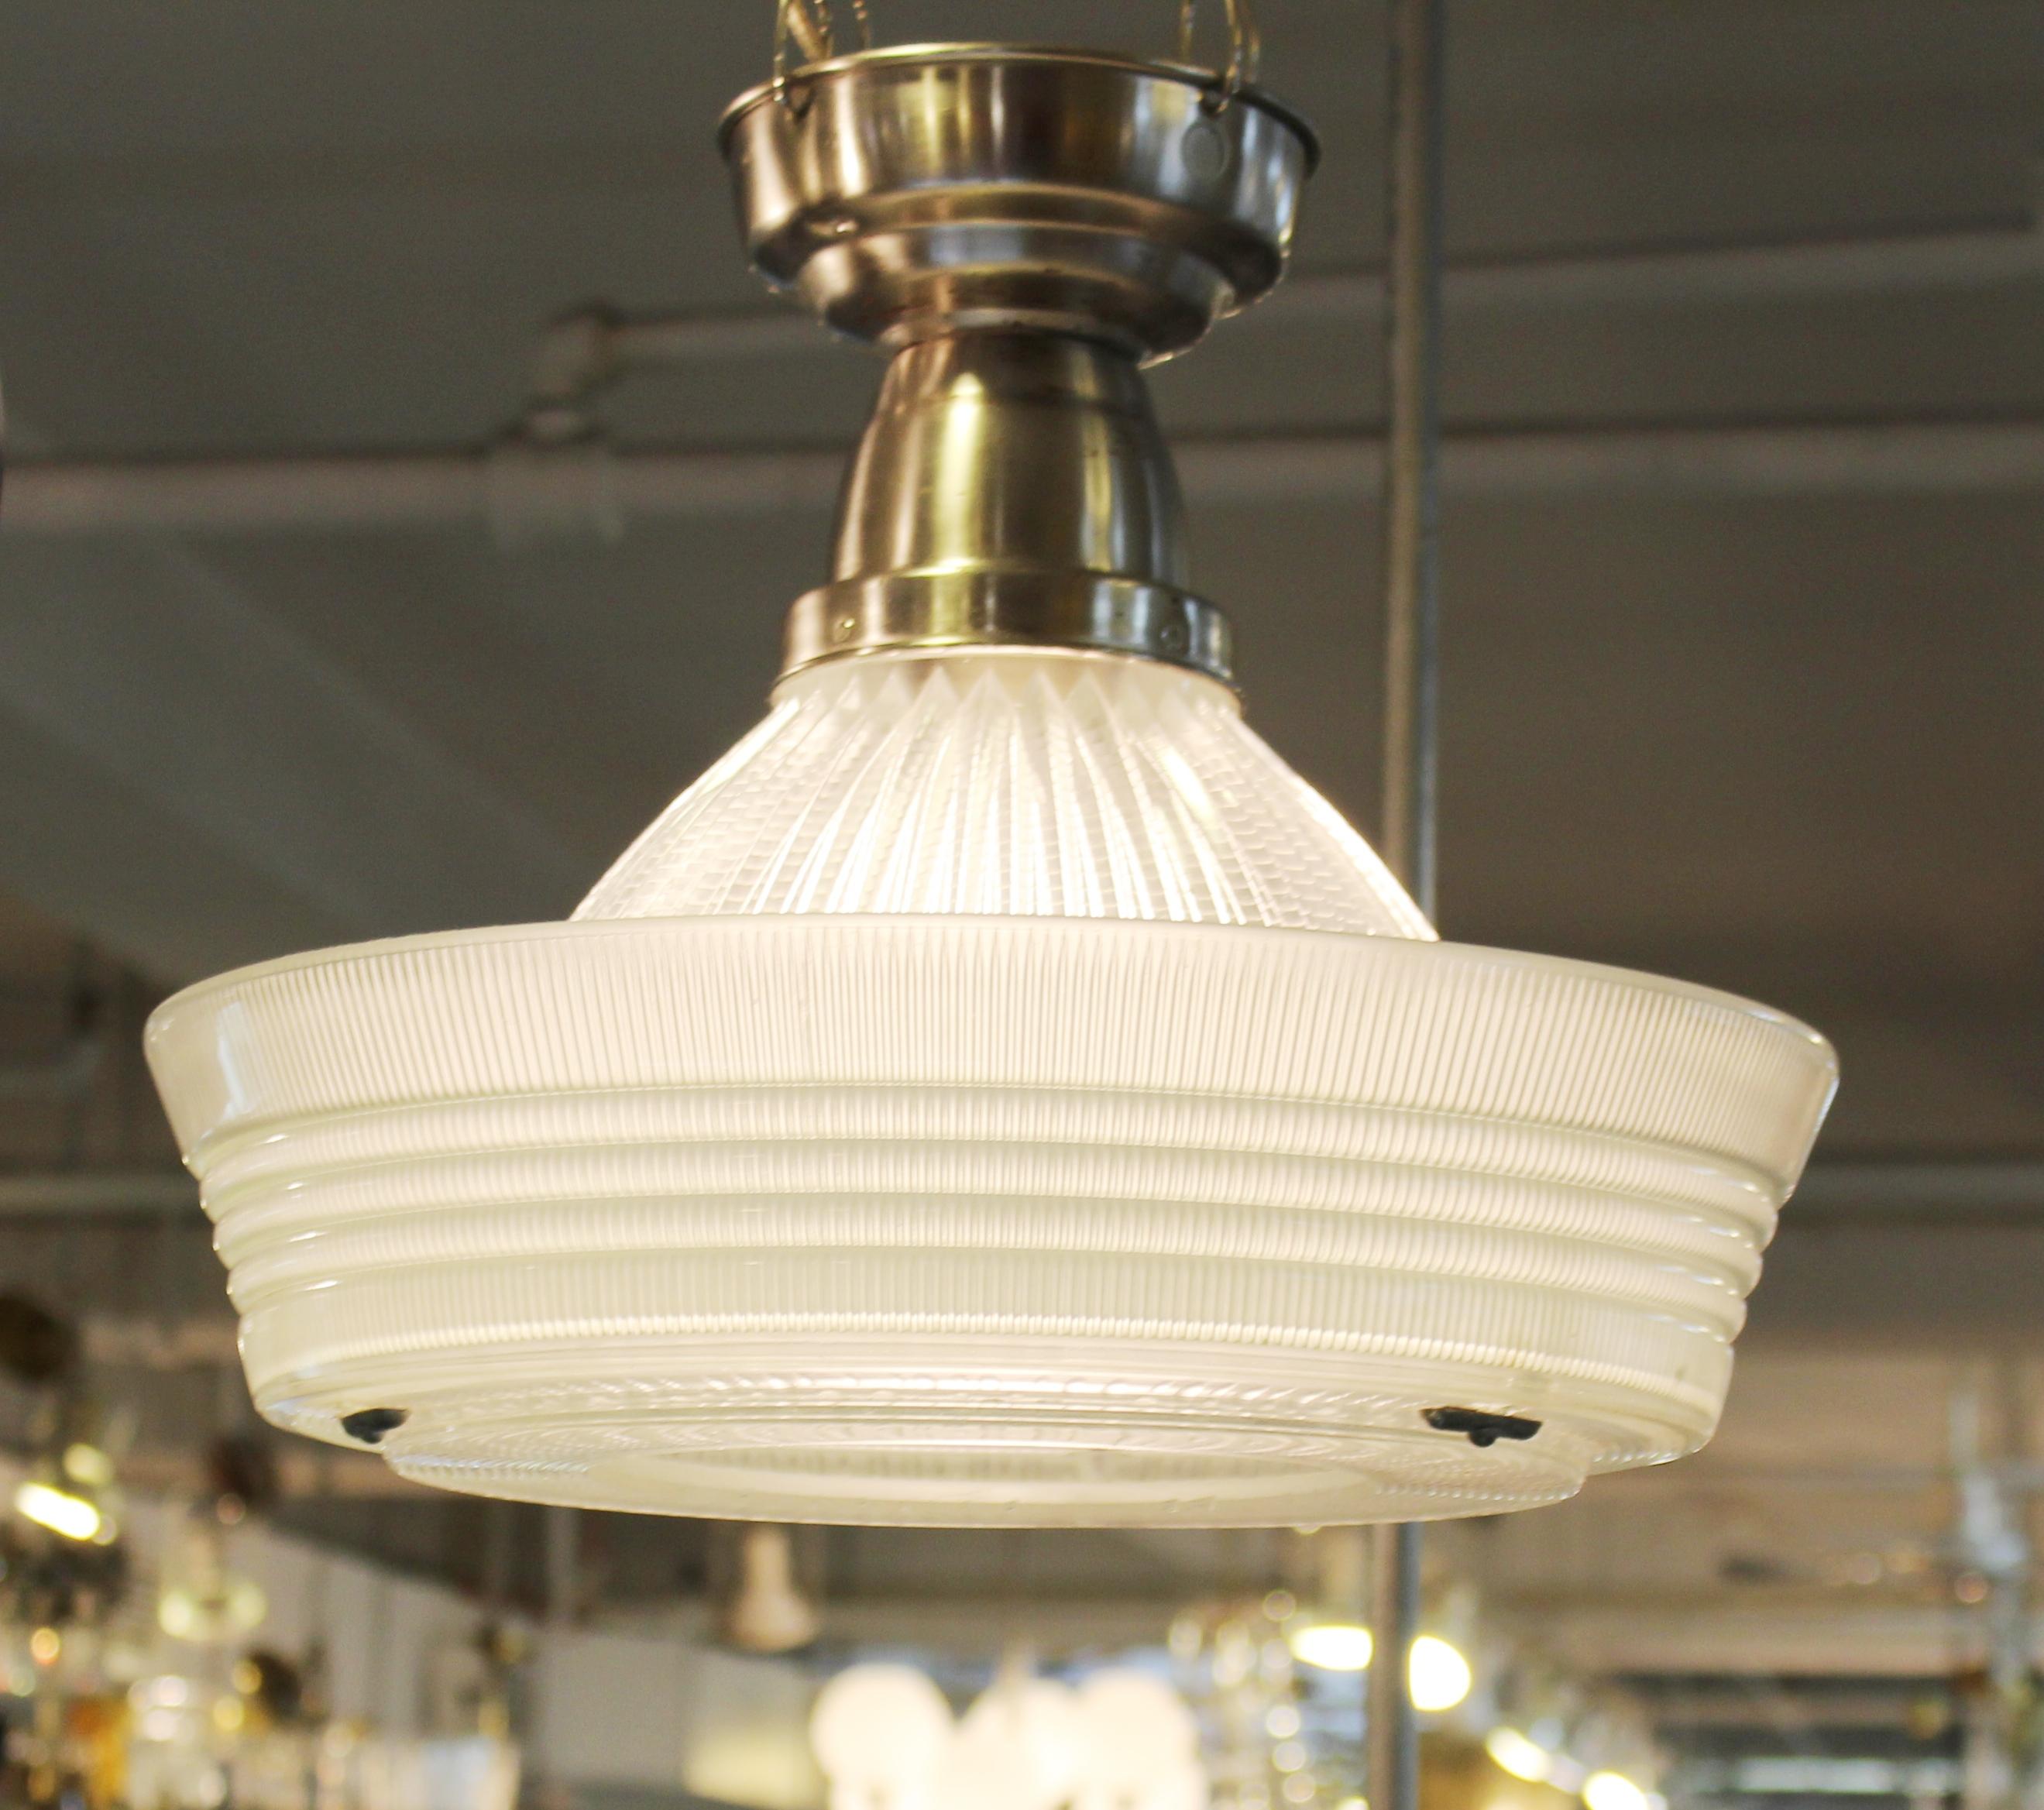 Mid-20th Century American Art Deco Industrial Pendants with Sailor Hat Holophane Shades